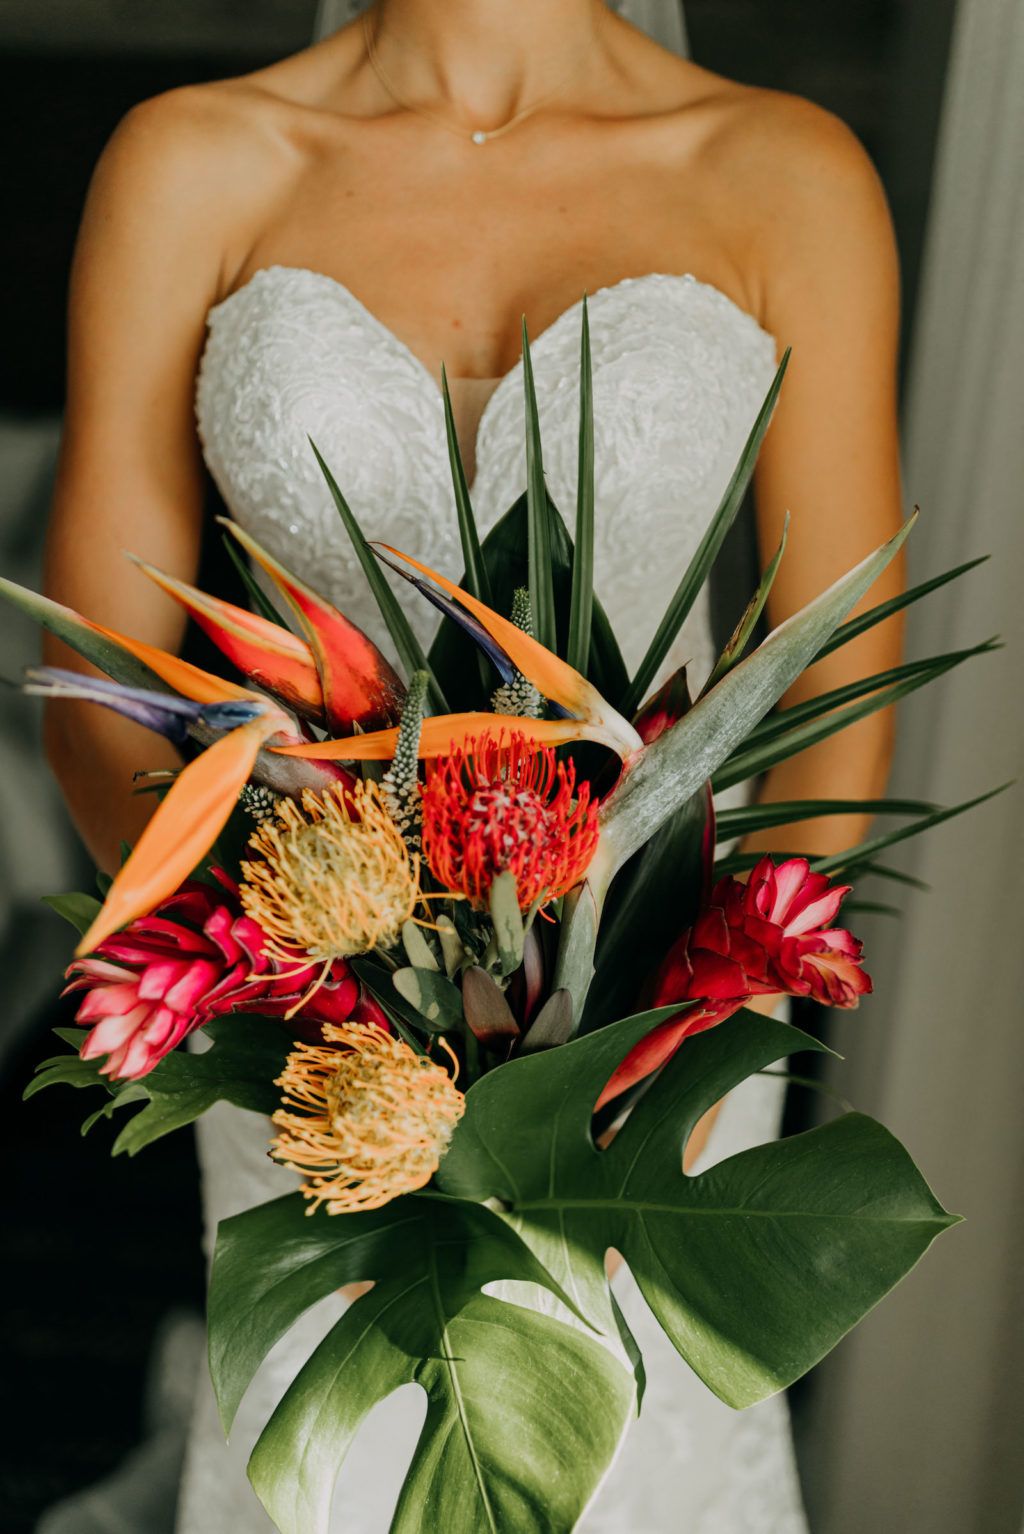 Florida Bride in Lace and Illusion Strapless Wedding Dress Holding Tropical Floral Bouquet, Yellow and Red Pincushion Proteas, Pink Ginger, Birds of Paradise, Monstera Palm Tree Leaves | Tampa Bay Wedding Photographer Amber McWhorter Photography